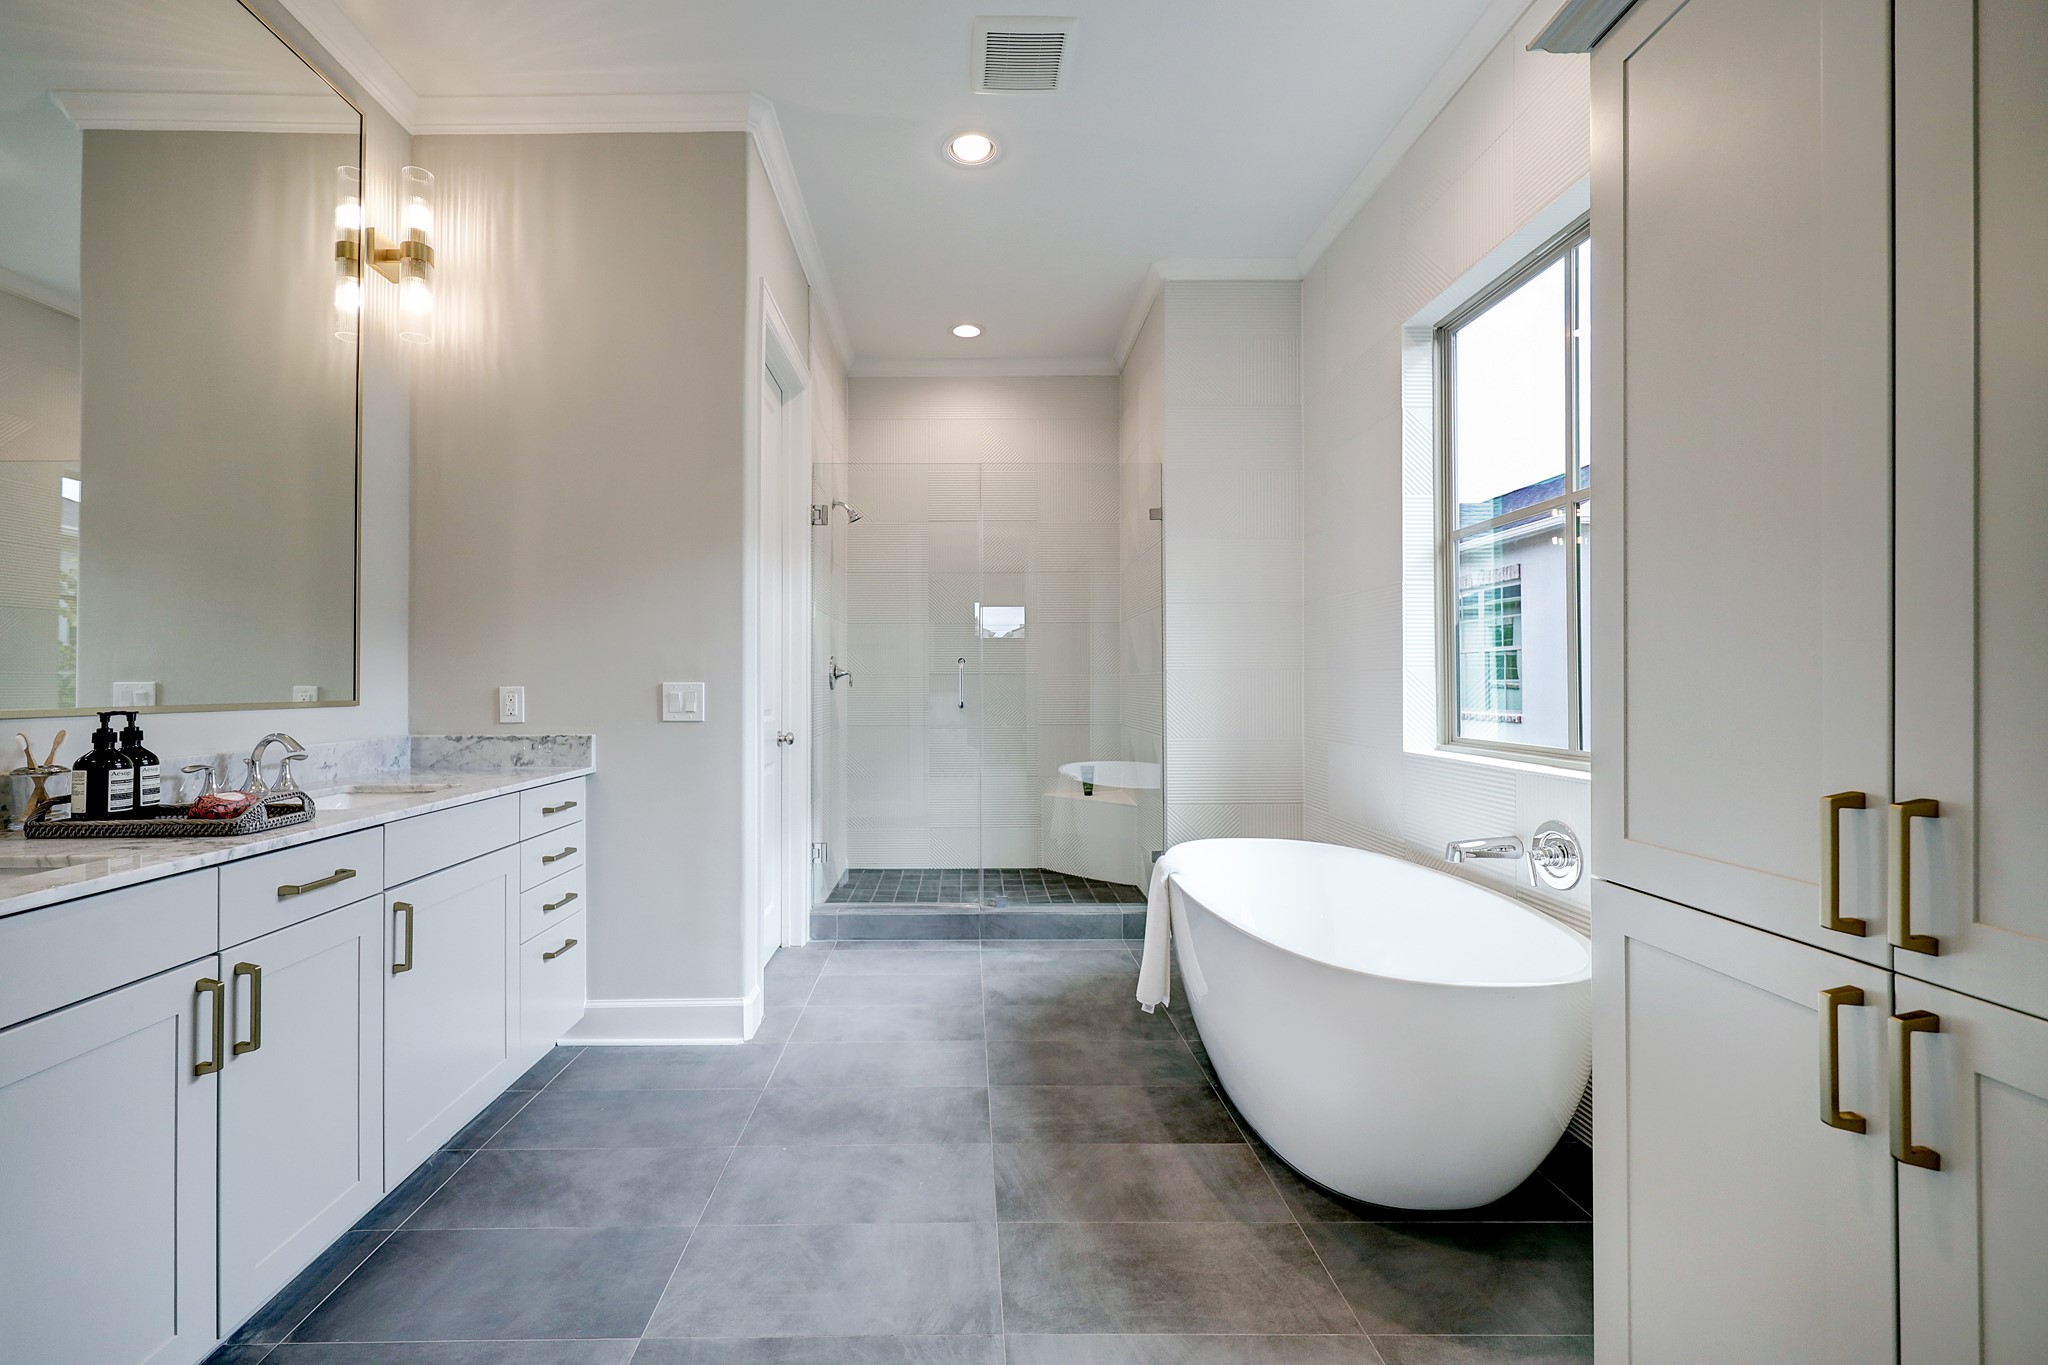 Primary bath features a soaking tub, walk in shower, double sinks and water closet.